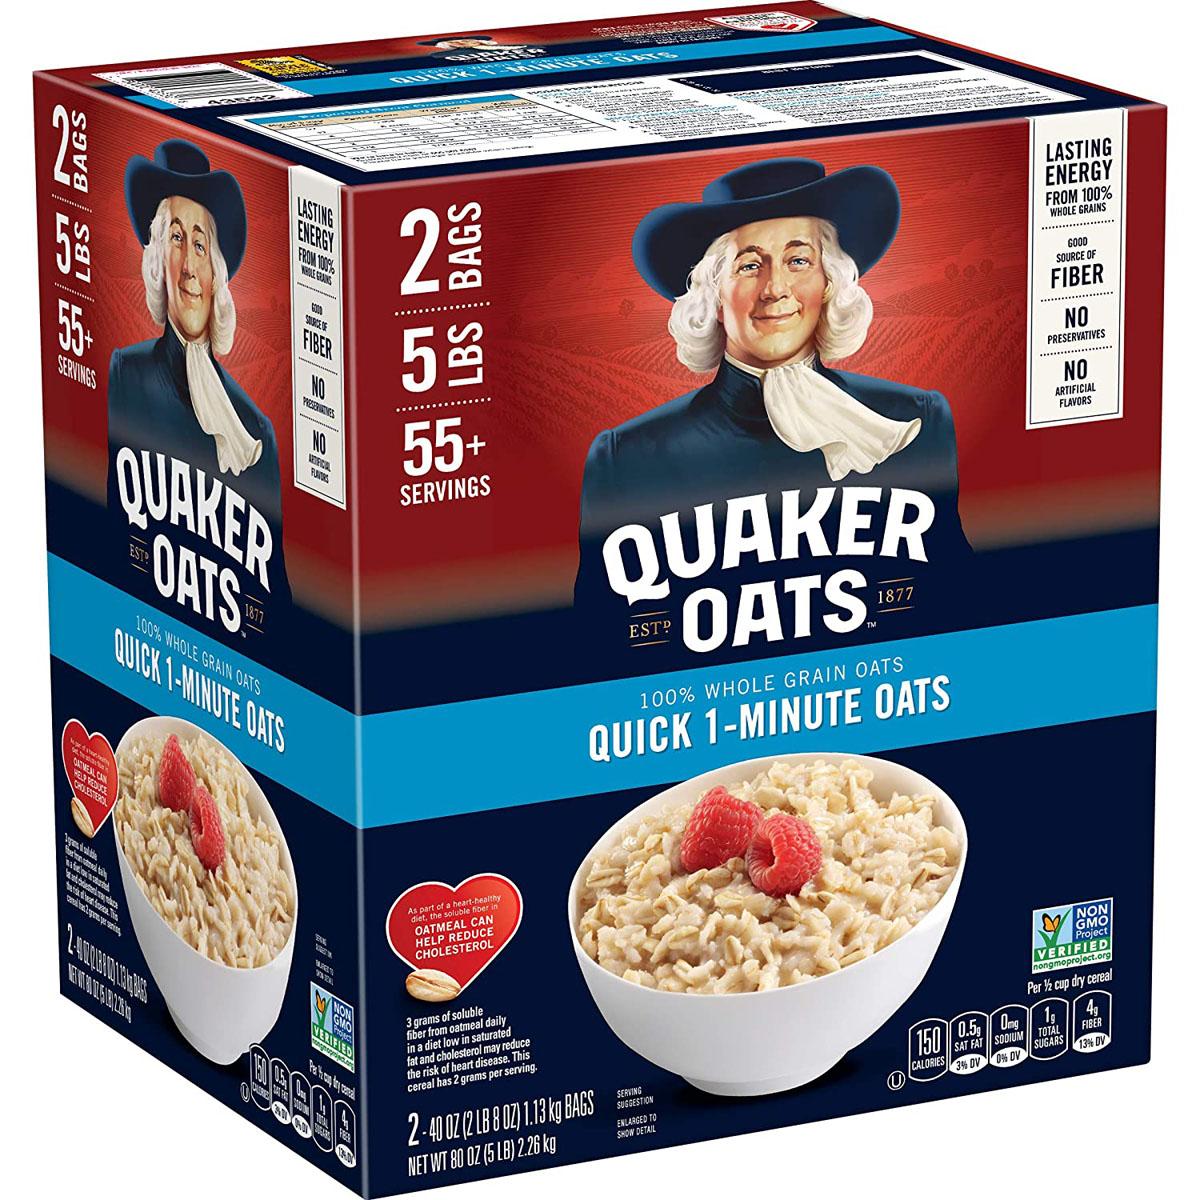 2 Quaker Oats Quick 1-Minute Oatmeal for $5.24 Shipped